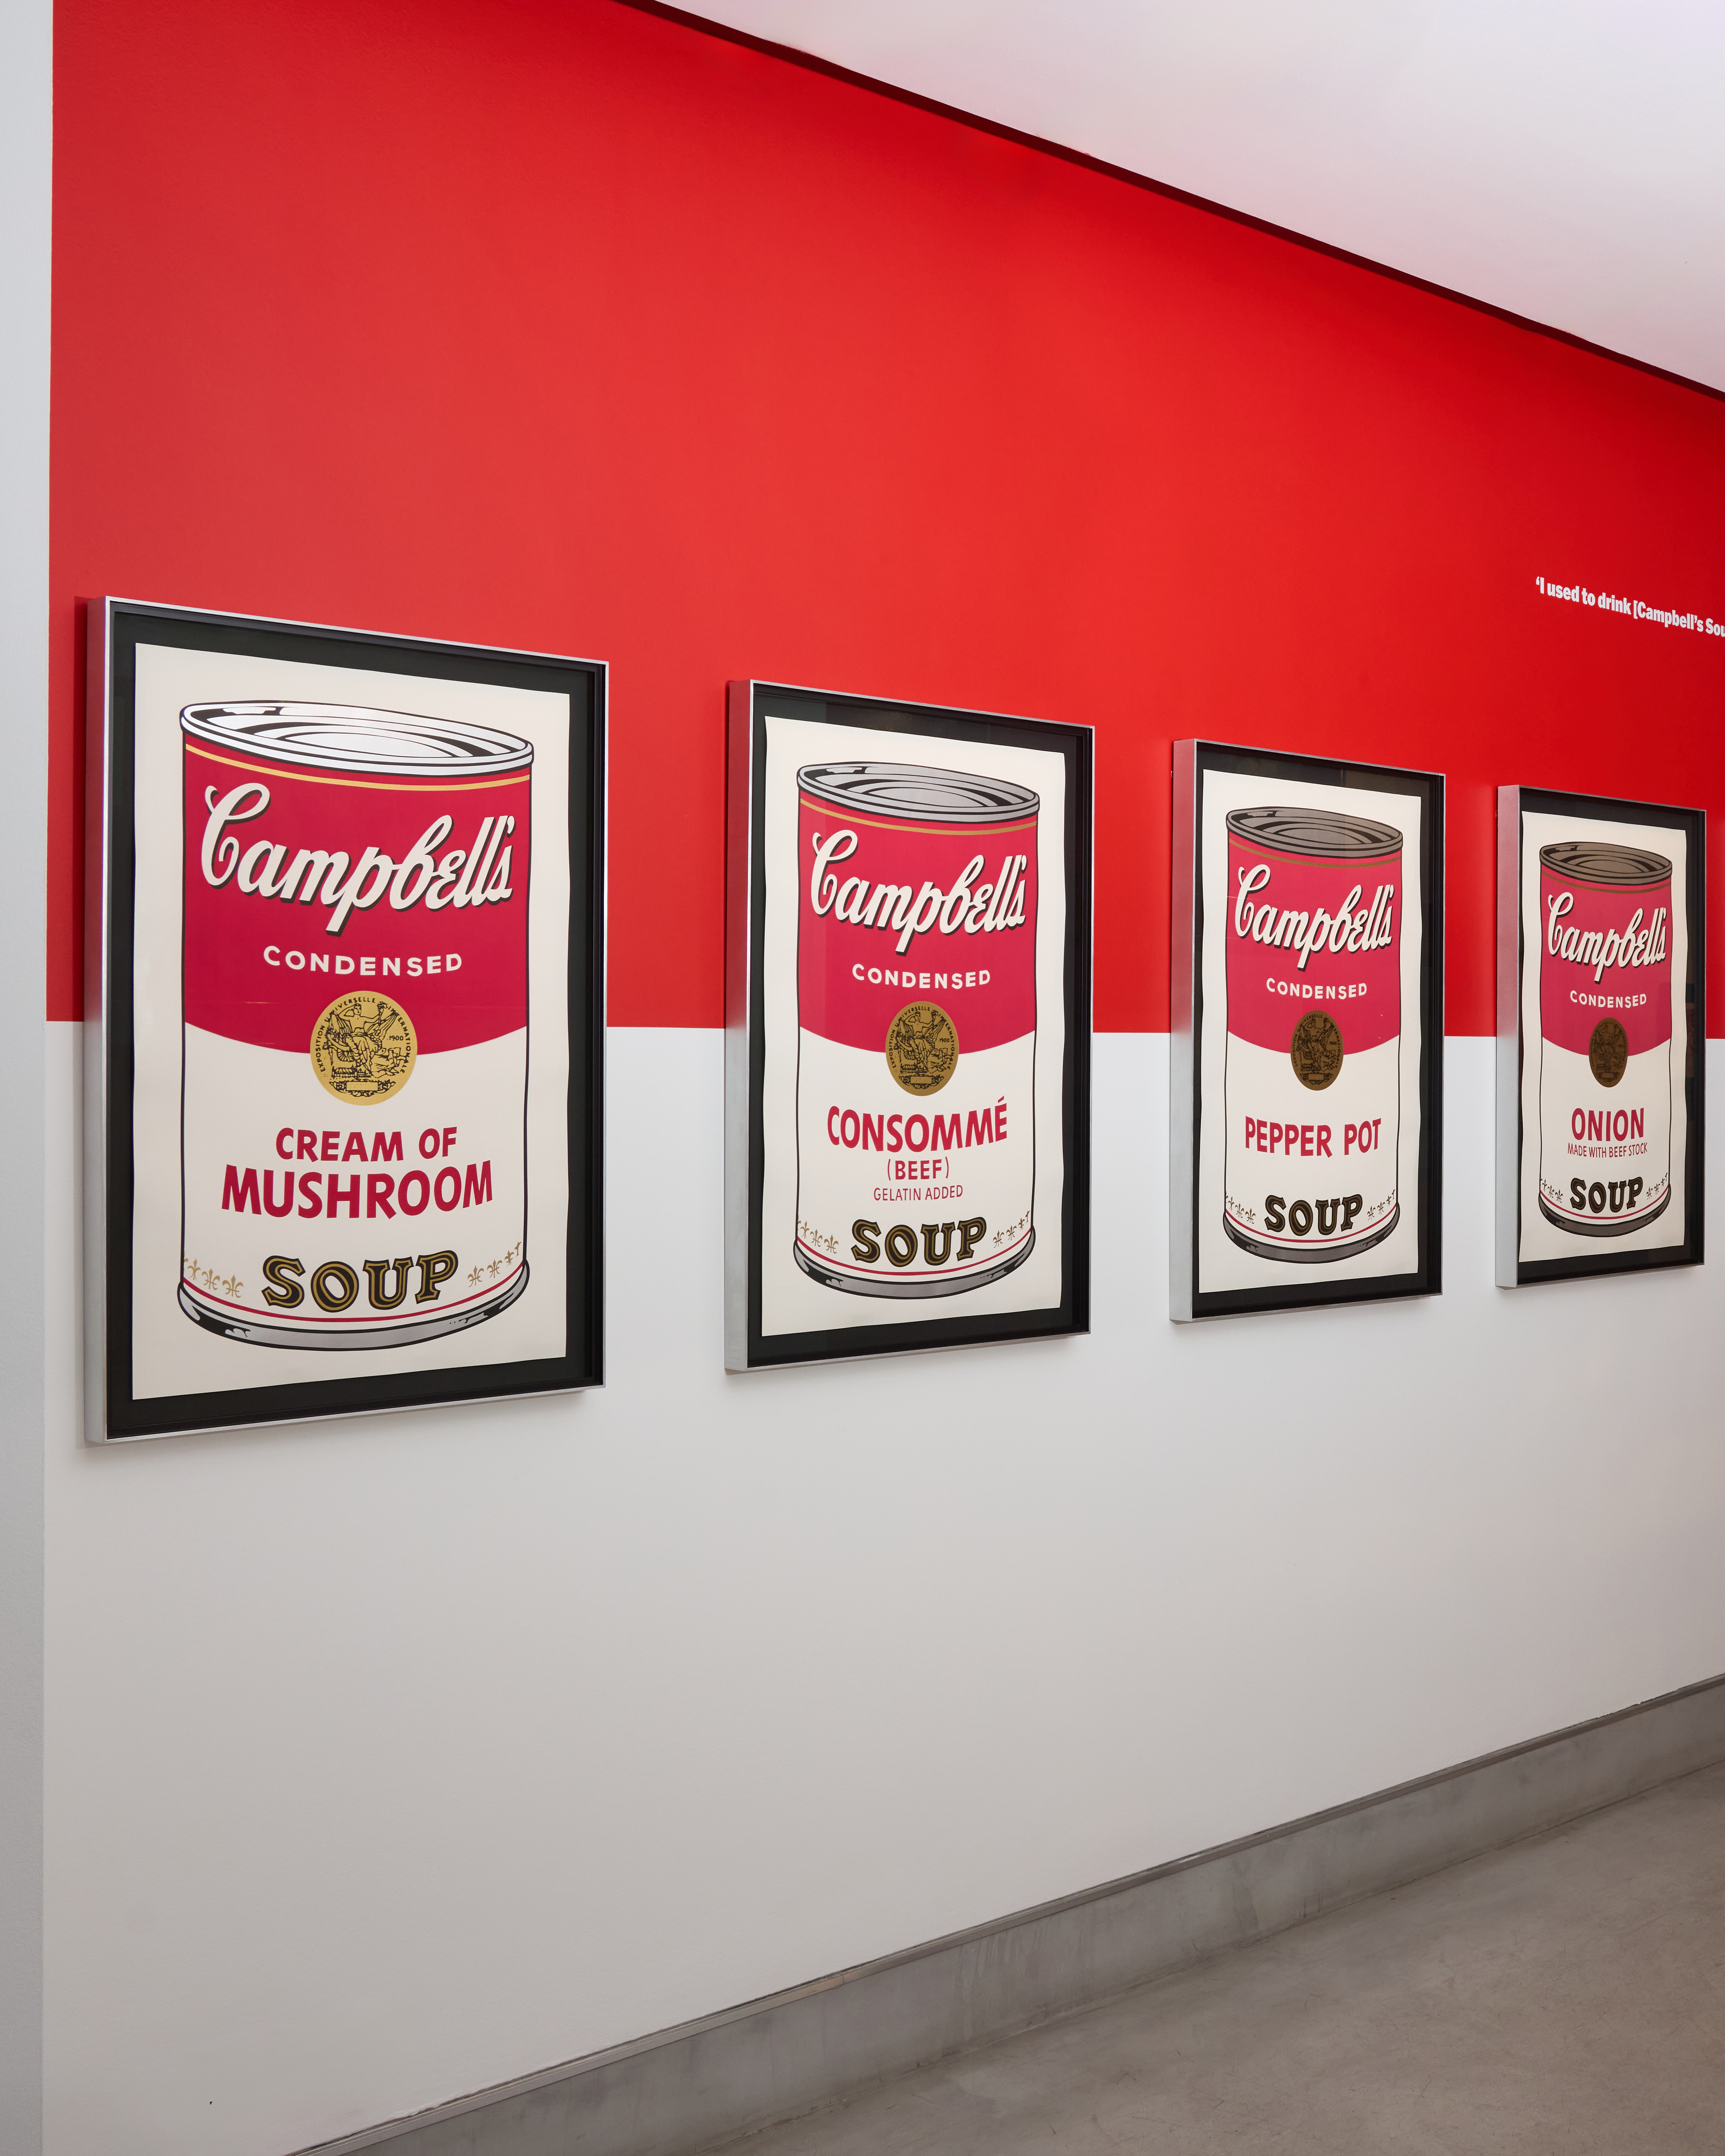 Beyond the Brand Andy Warhol at Halcyon Gallery - Warhol reimagined famous adverts